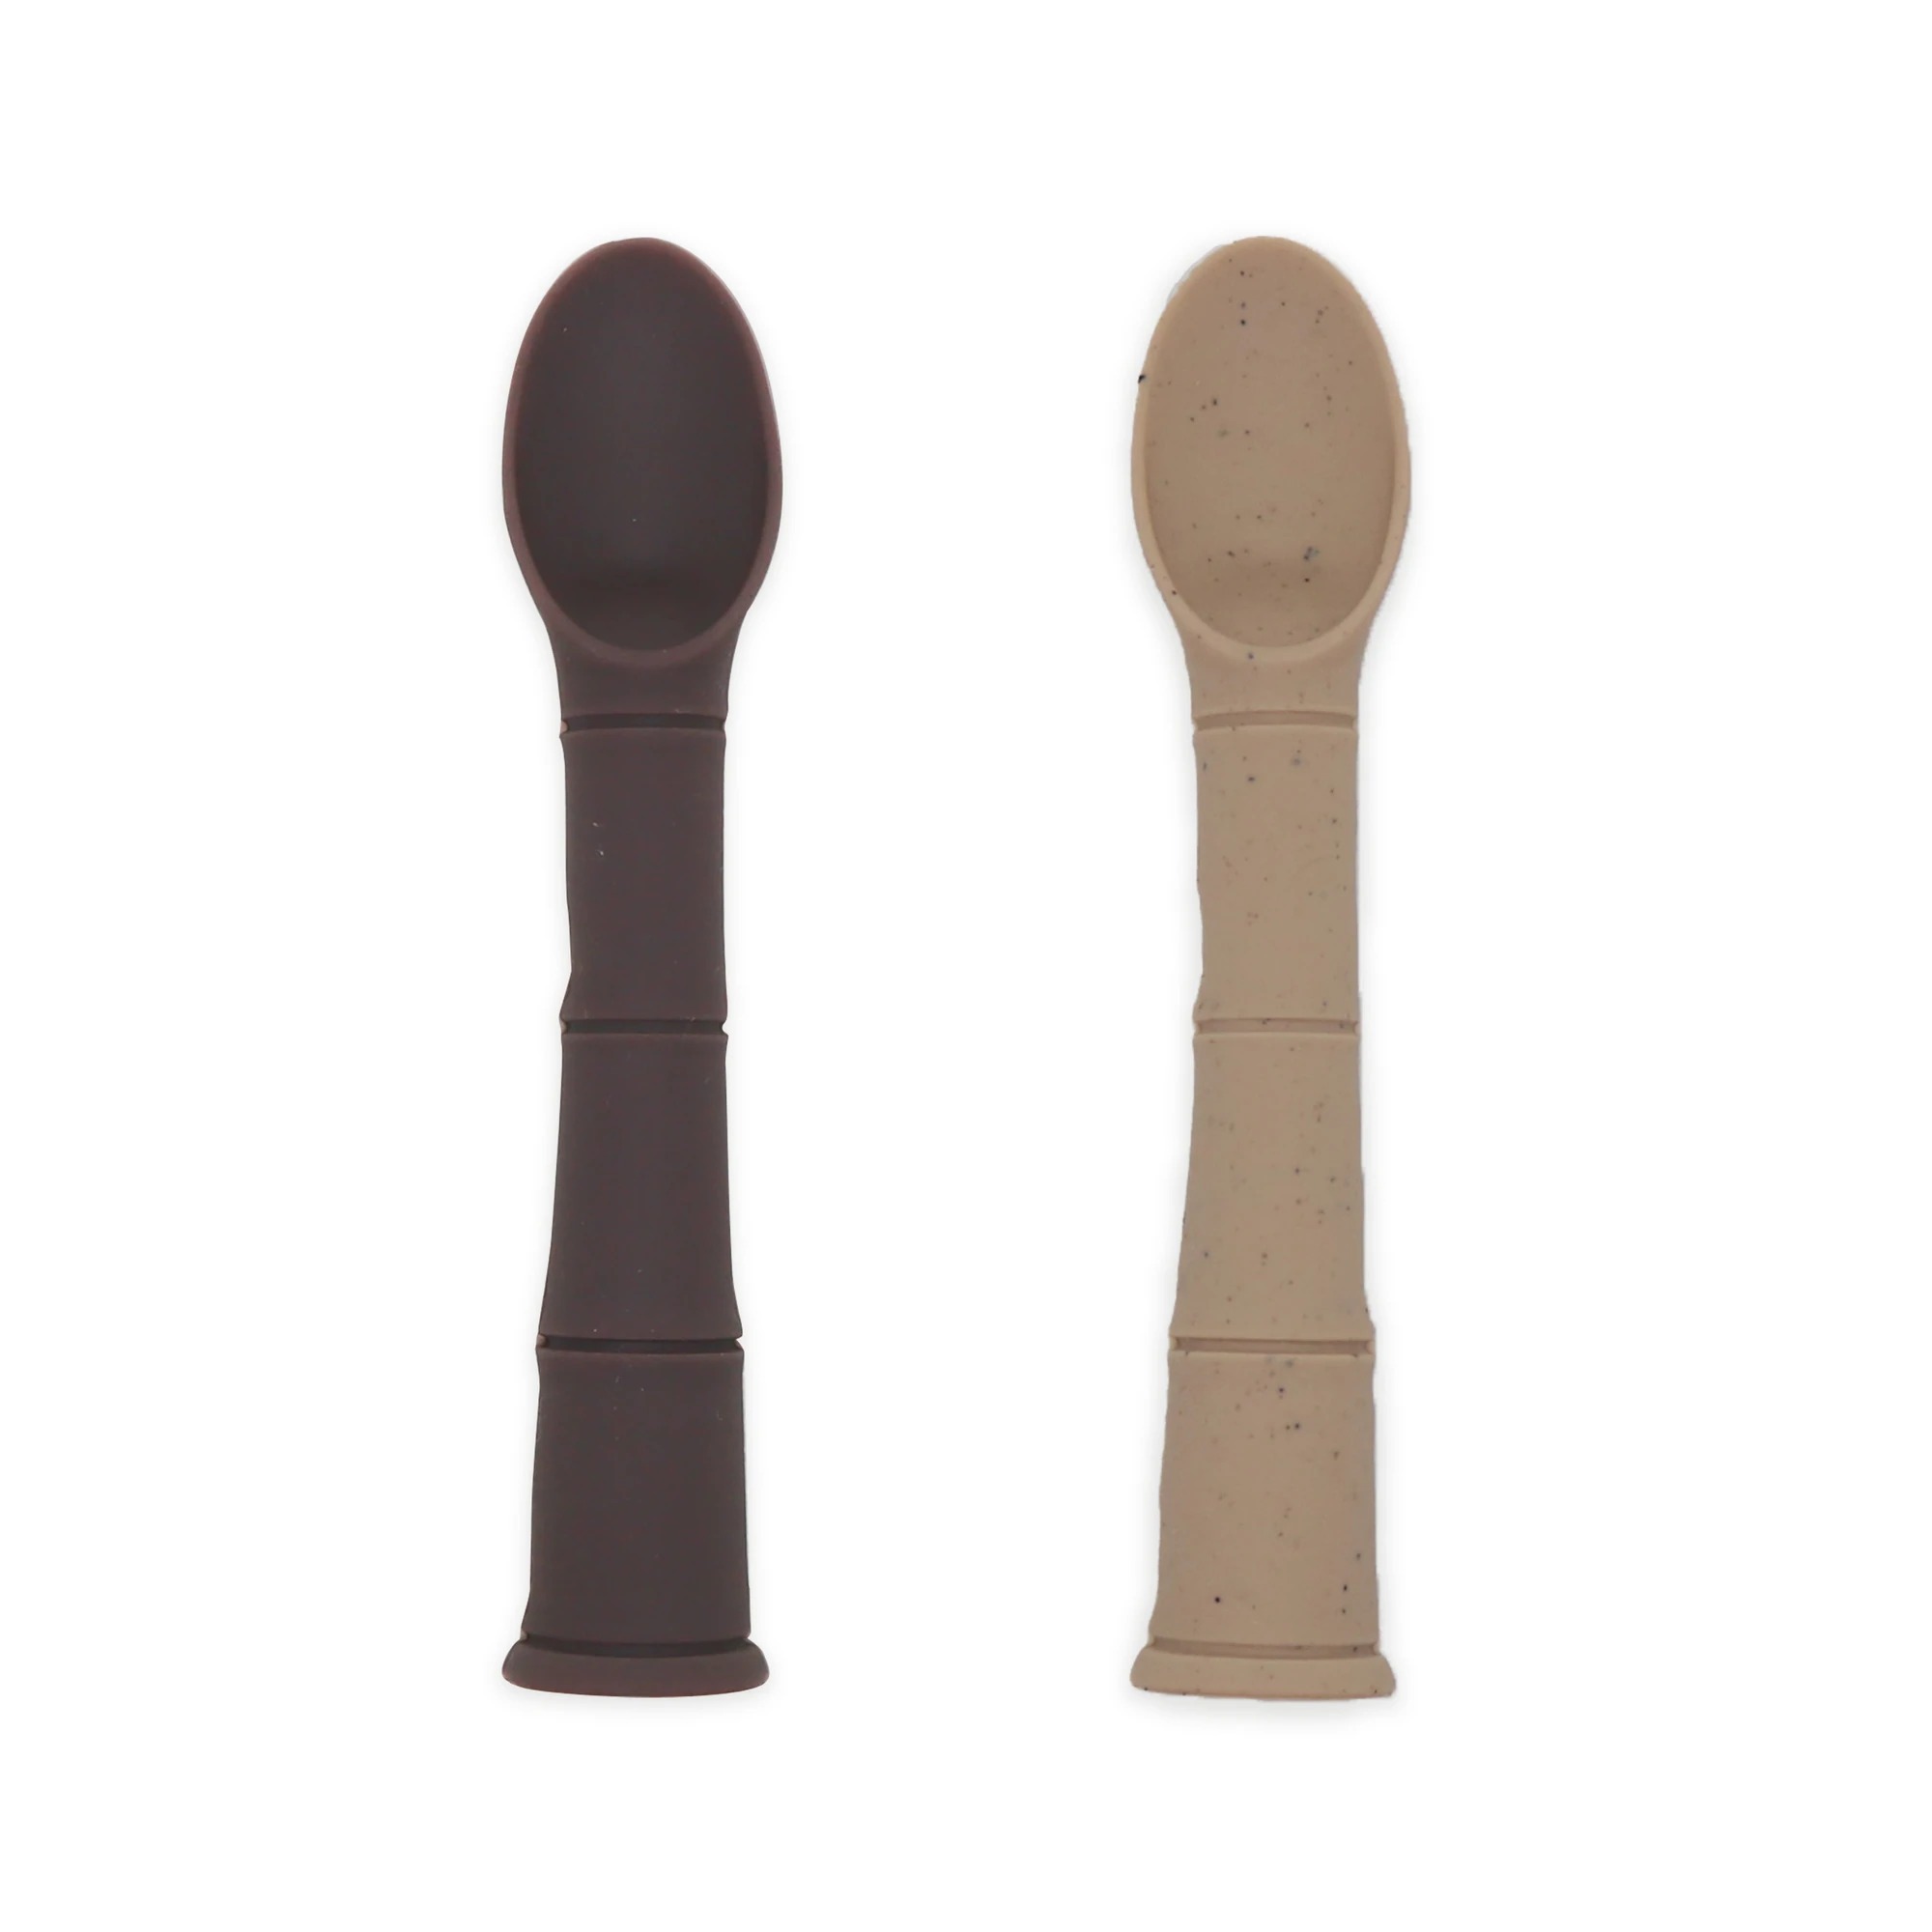 Kushies Silipop Spoons 2 Pack - Sparrow/Almond